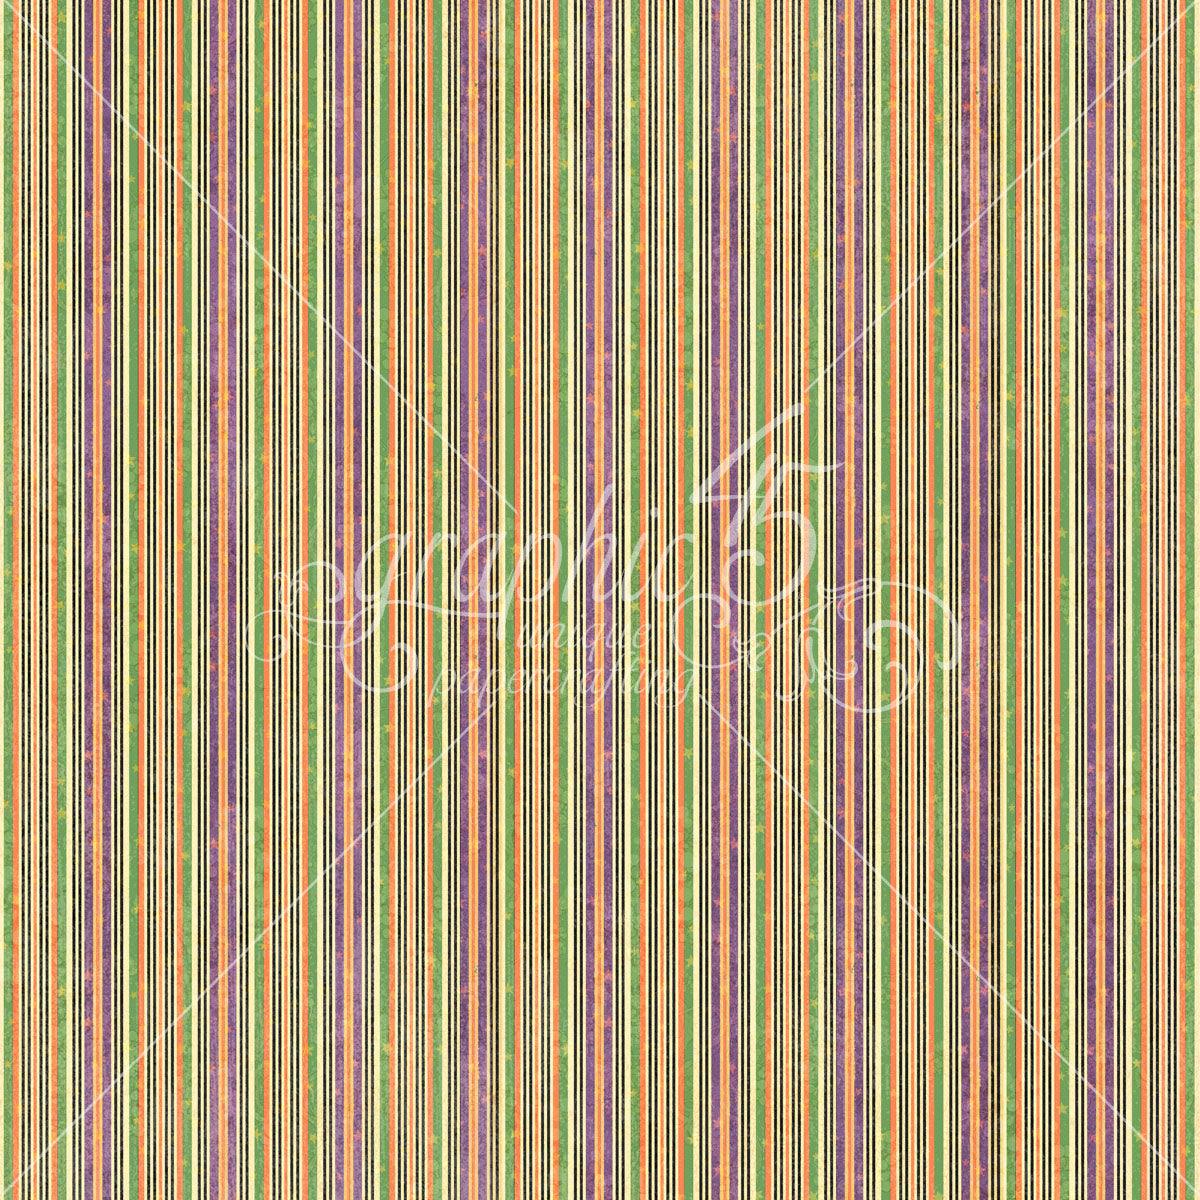 Charmed Collection Let's Party 12 x 12 Double-Sided Scrapbook Paper by Graphic 45 - Scrapbook Supply Companies